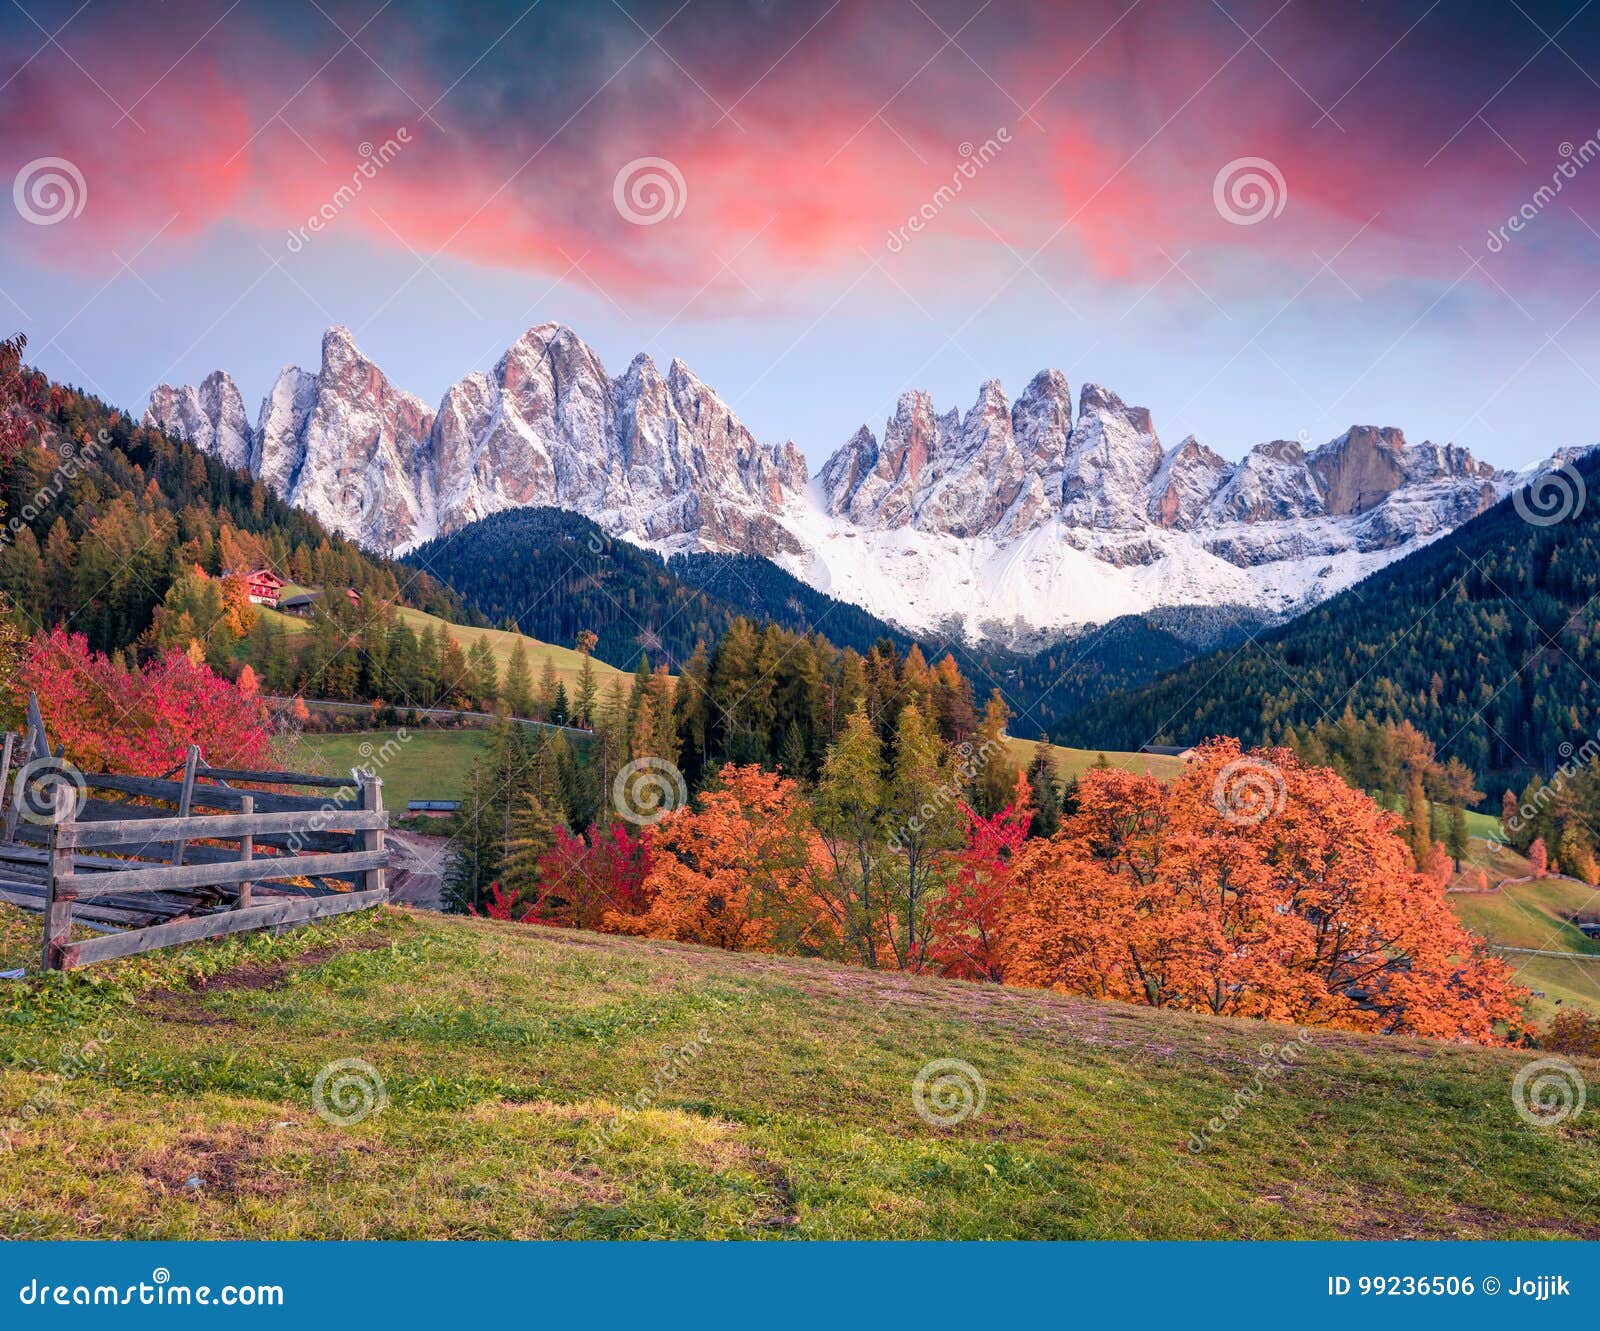 beautiful view of santa maddalena village in front of the geisler or odle dolomites group. colorful autumn sunset in dolomite alps